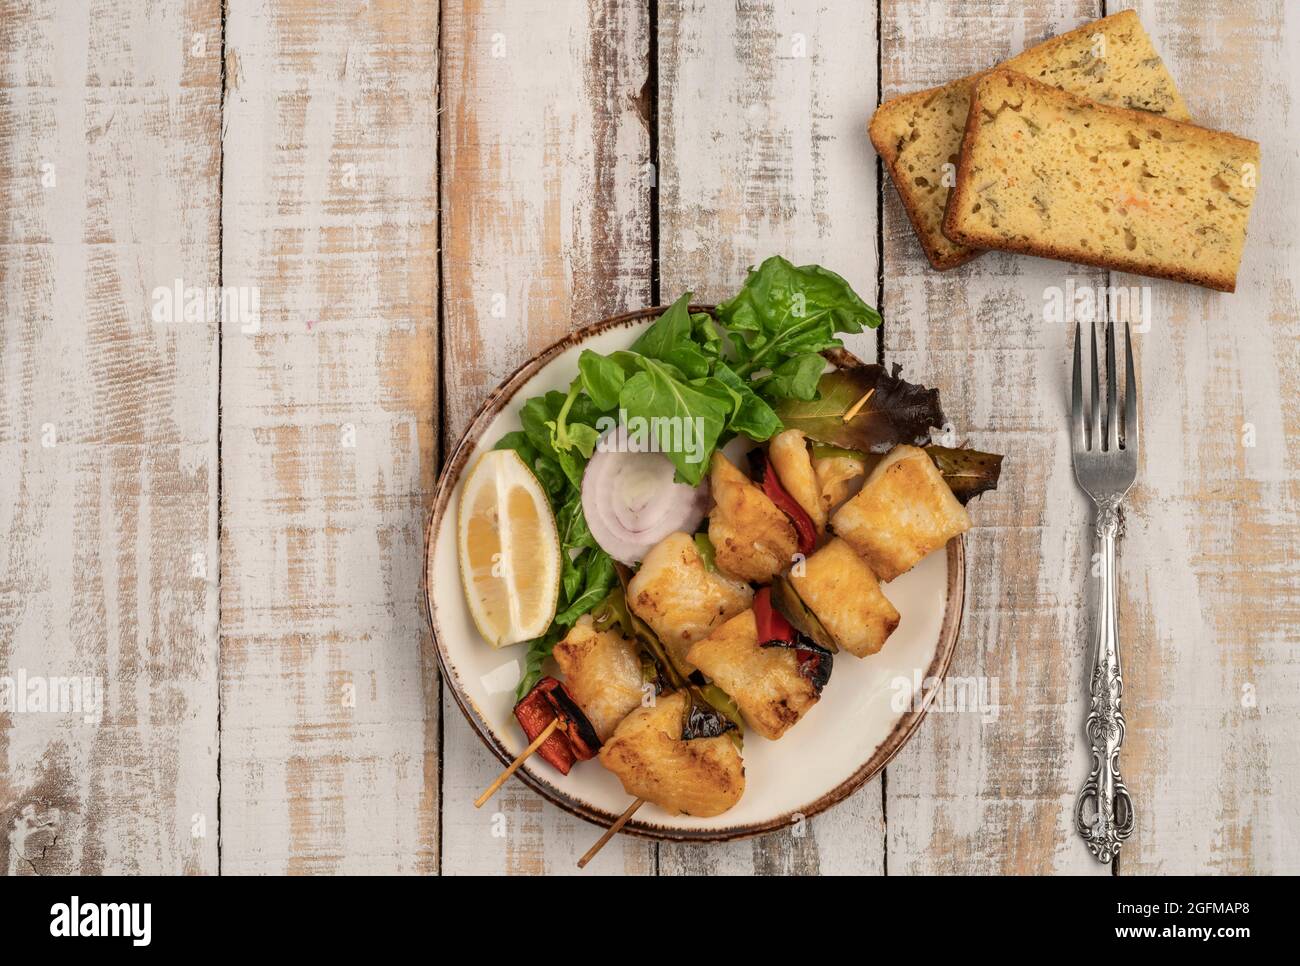 Skewed sole fish served with salad and corn bread on a wooden table Stock Photo